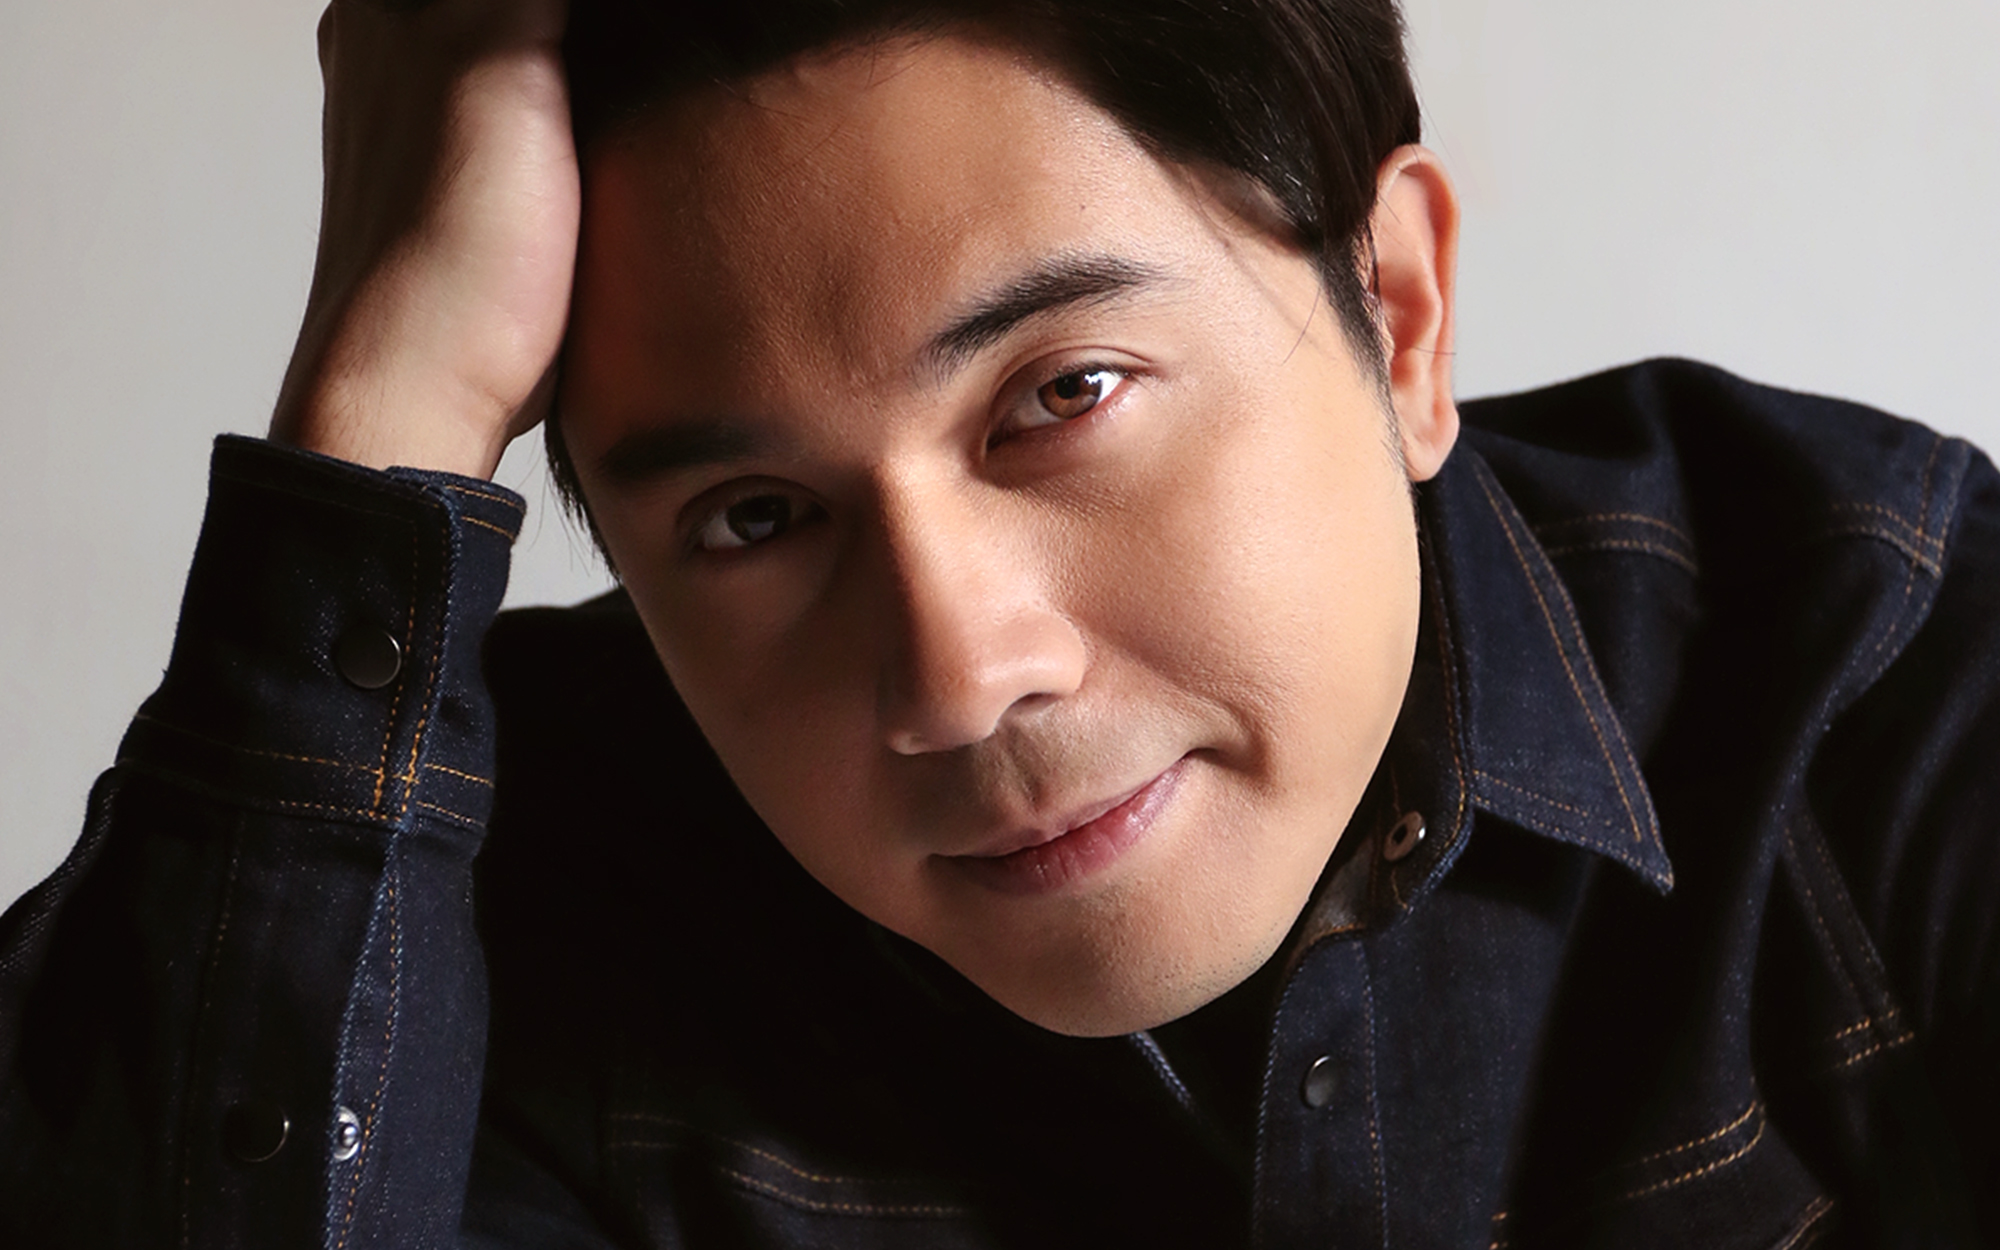 paulo-avelino-admits-he-considered-suicide-amid-depression-2